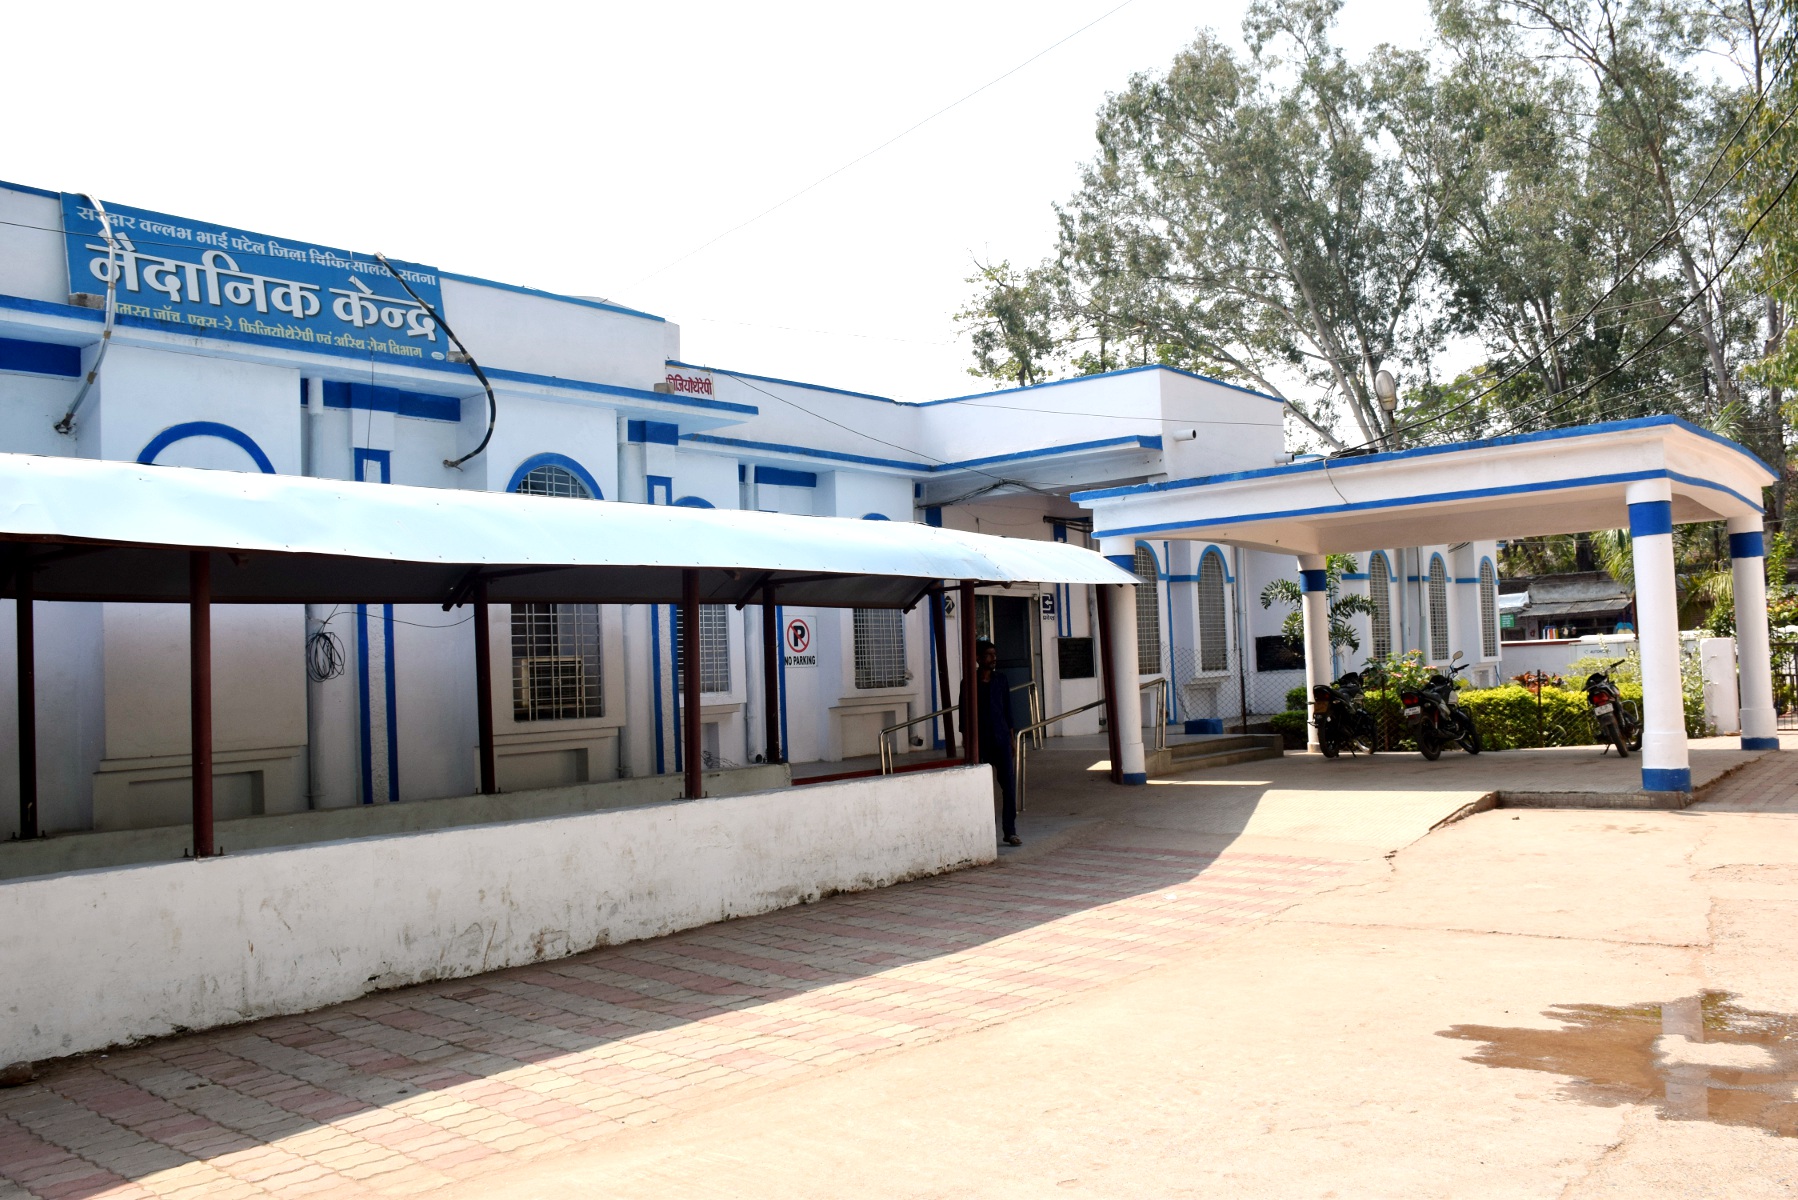 Satna District Hospital now has the number one in the target